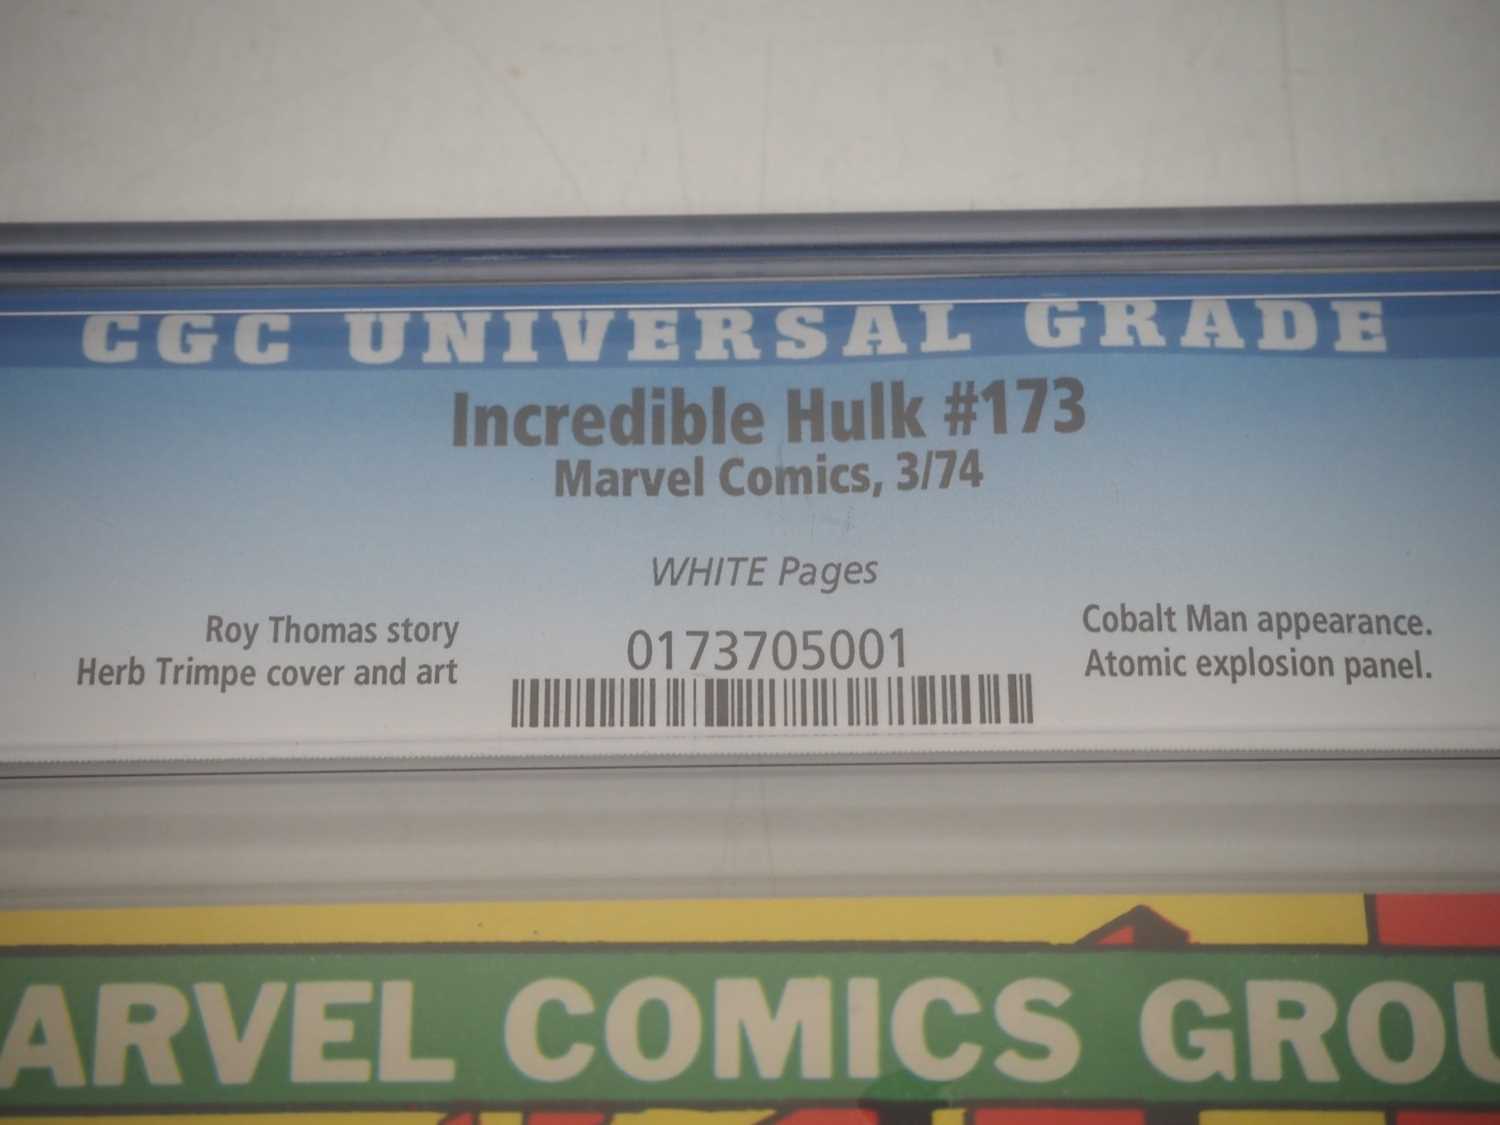 INCREDIBLE HULK #173 (1974 - MARVEL) GRADED 9.6 (NM+) by CGC - Herb Trimpe cover and art - CGC 9. - Image 4 of 4